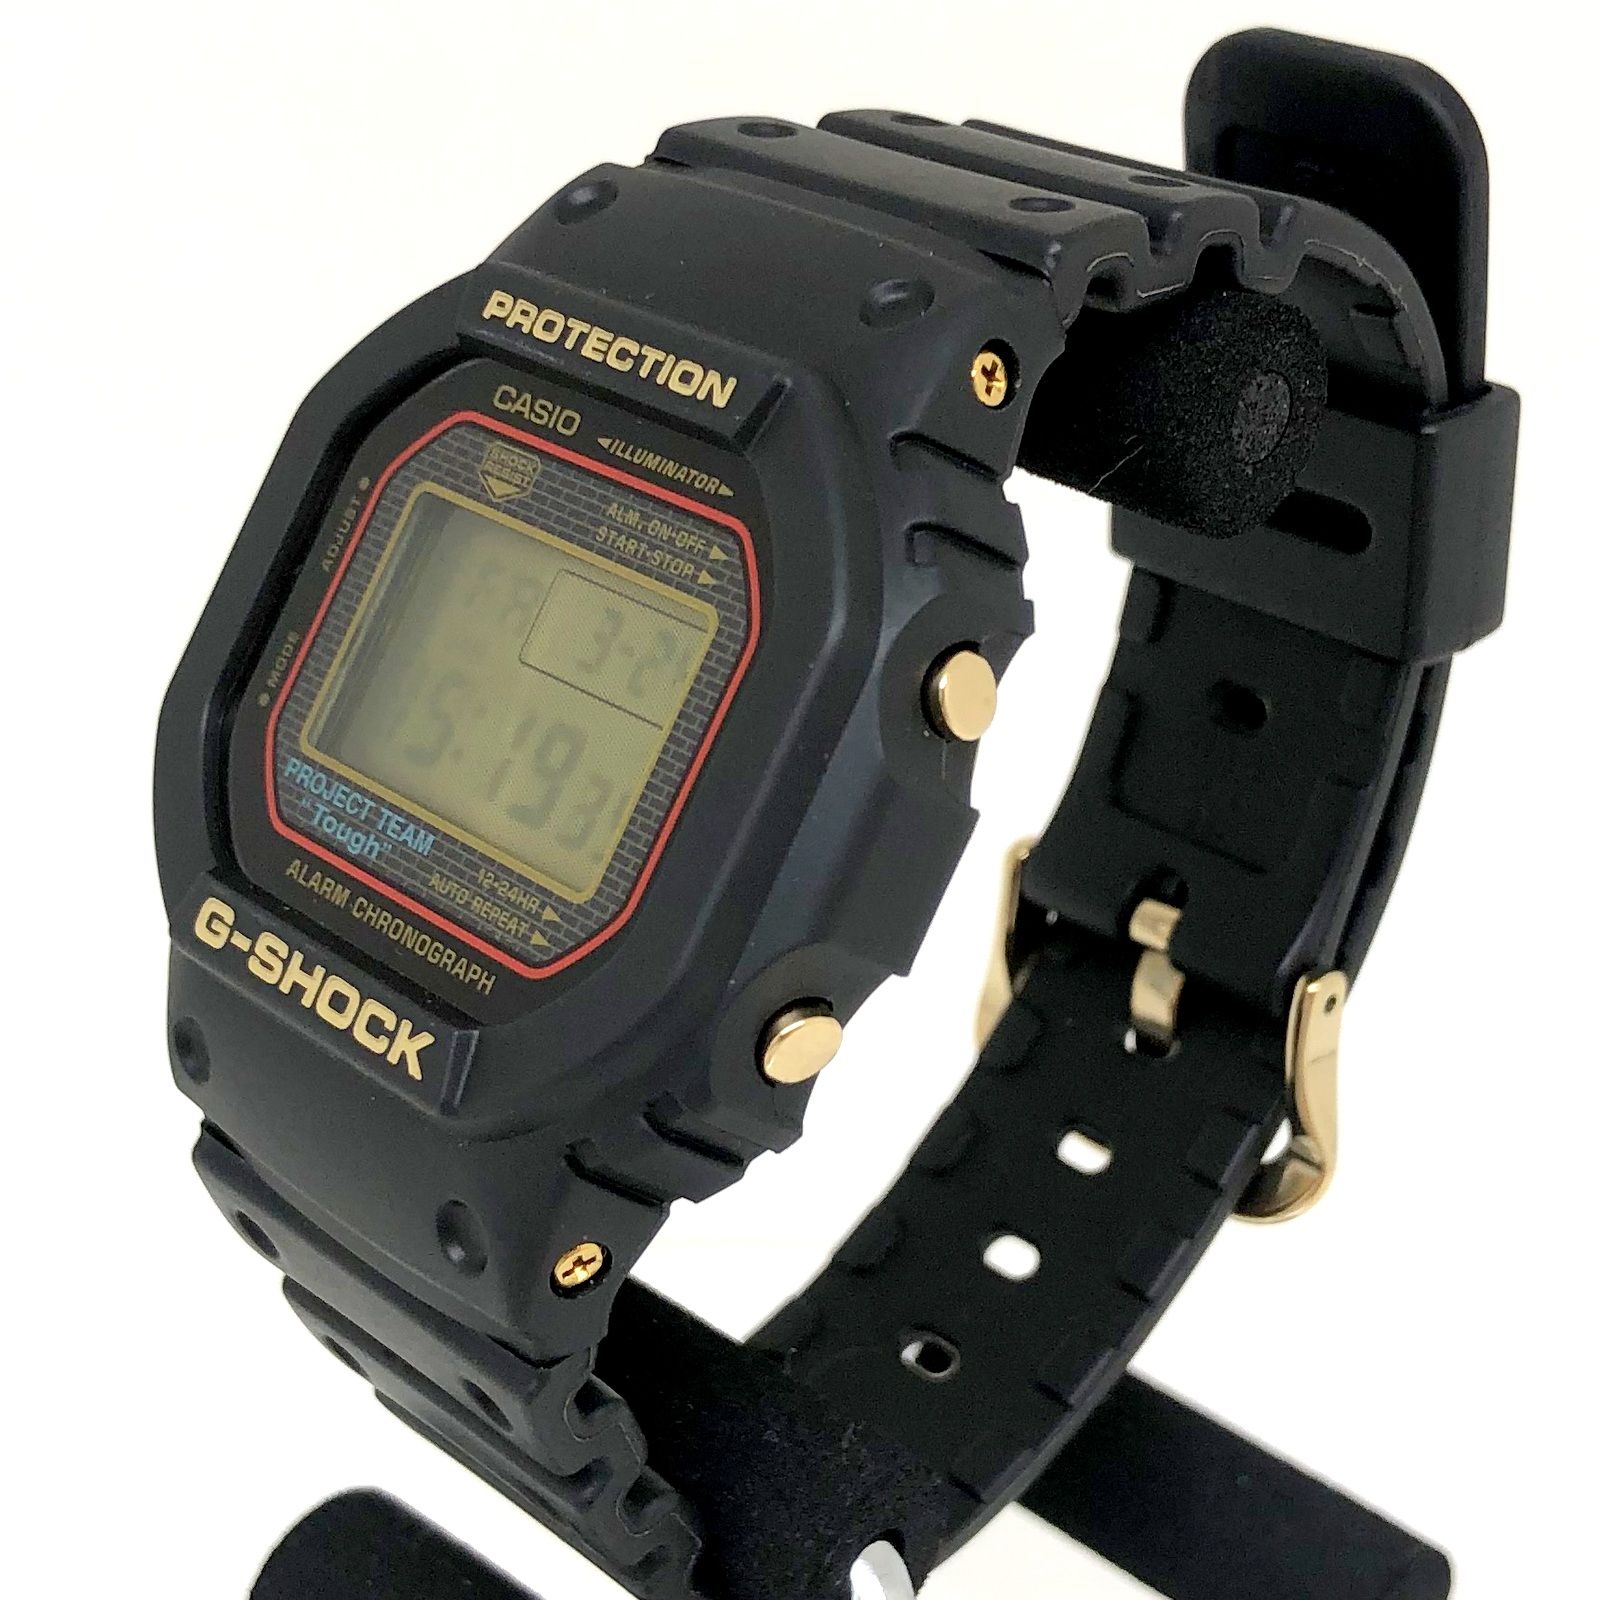 G-SHOCK 25周年限定 DW-5025SP-1JF スピード 5600 - 時計